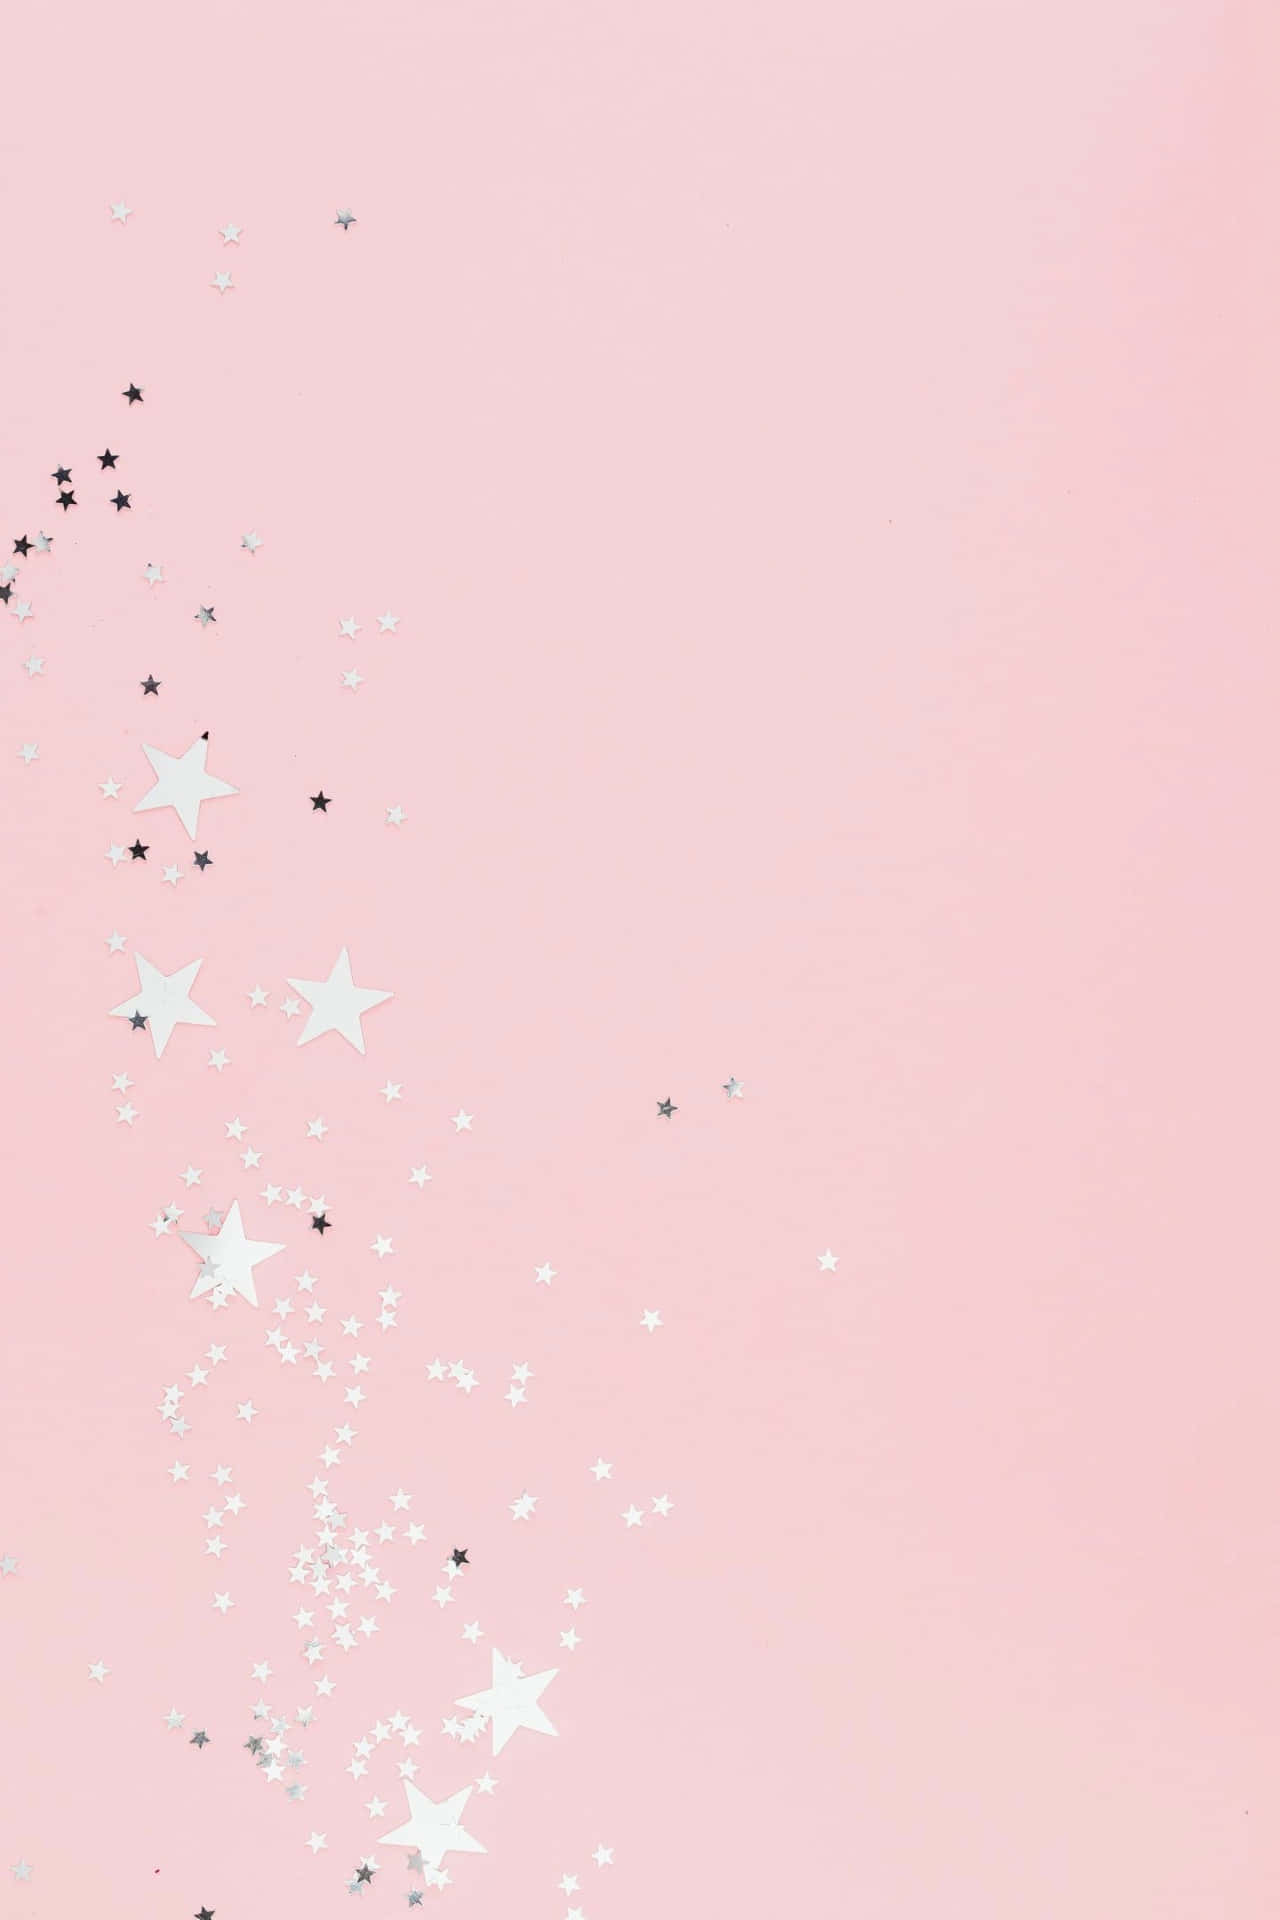 A Pink Background With Stars And Glitter